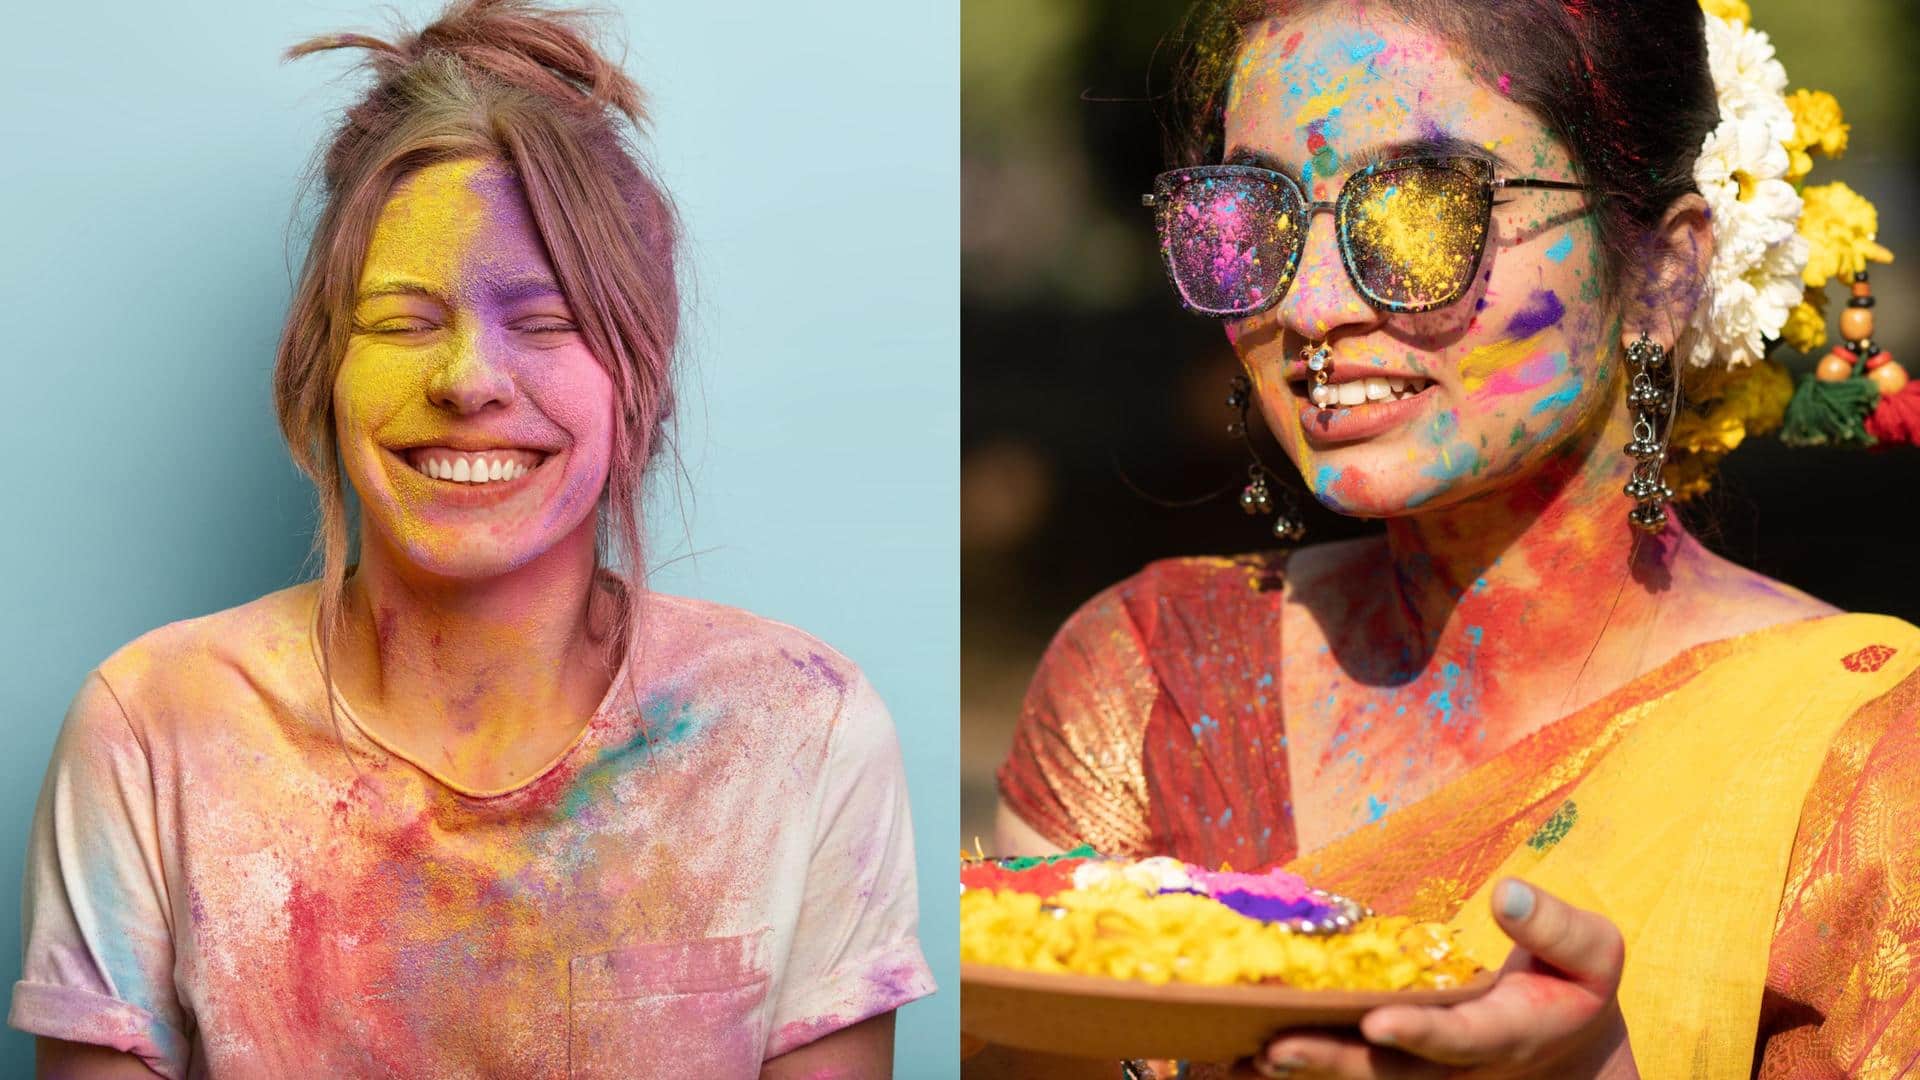 Here are 5 fun Holi outfit ideas for women 